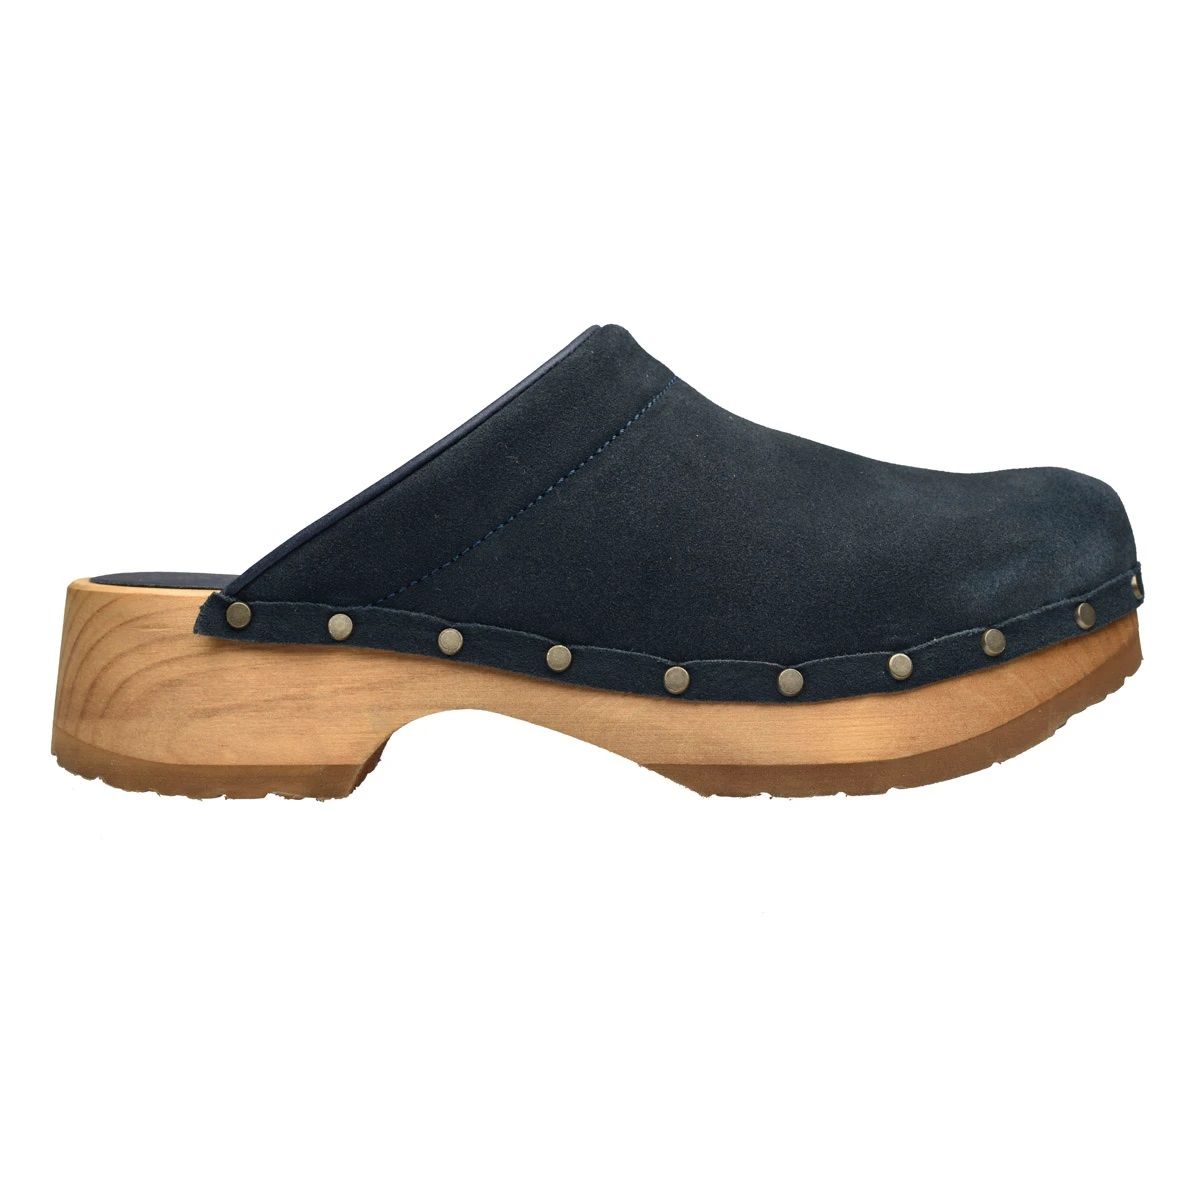 Sanita Clogs Cho Chunky Blue womens clogs Lotta from Stockholm. Blue suede clogs upper with wooden clogs base